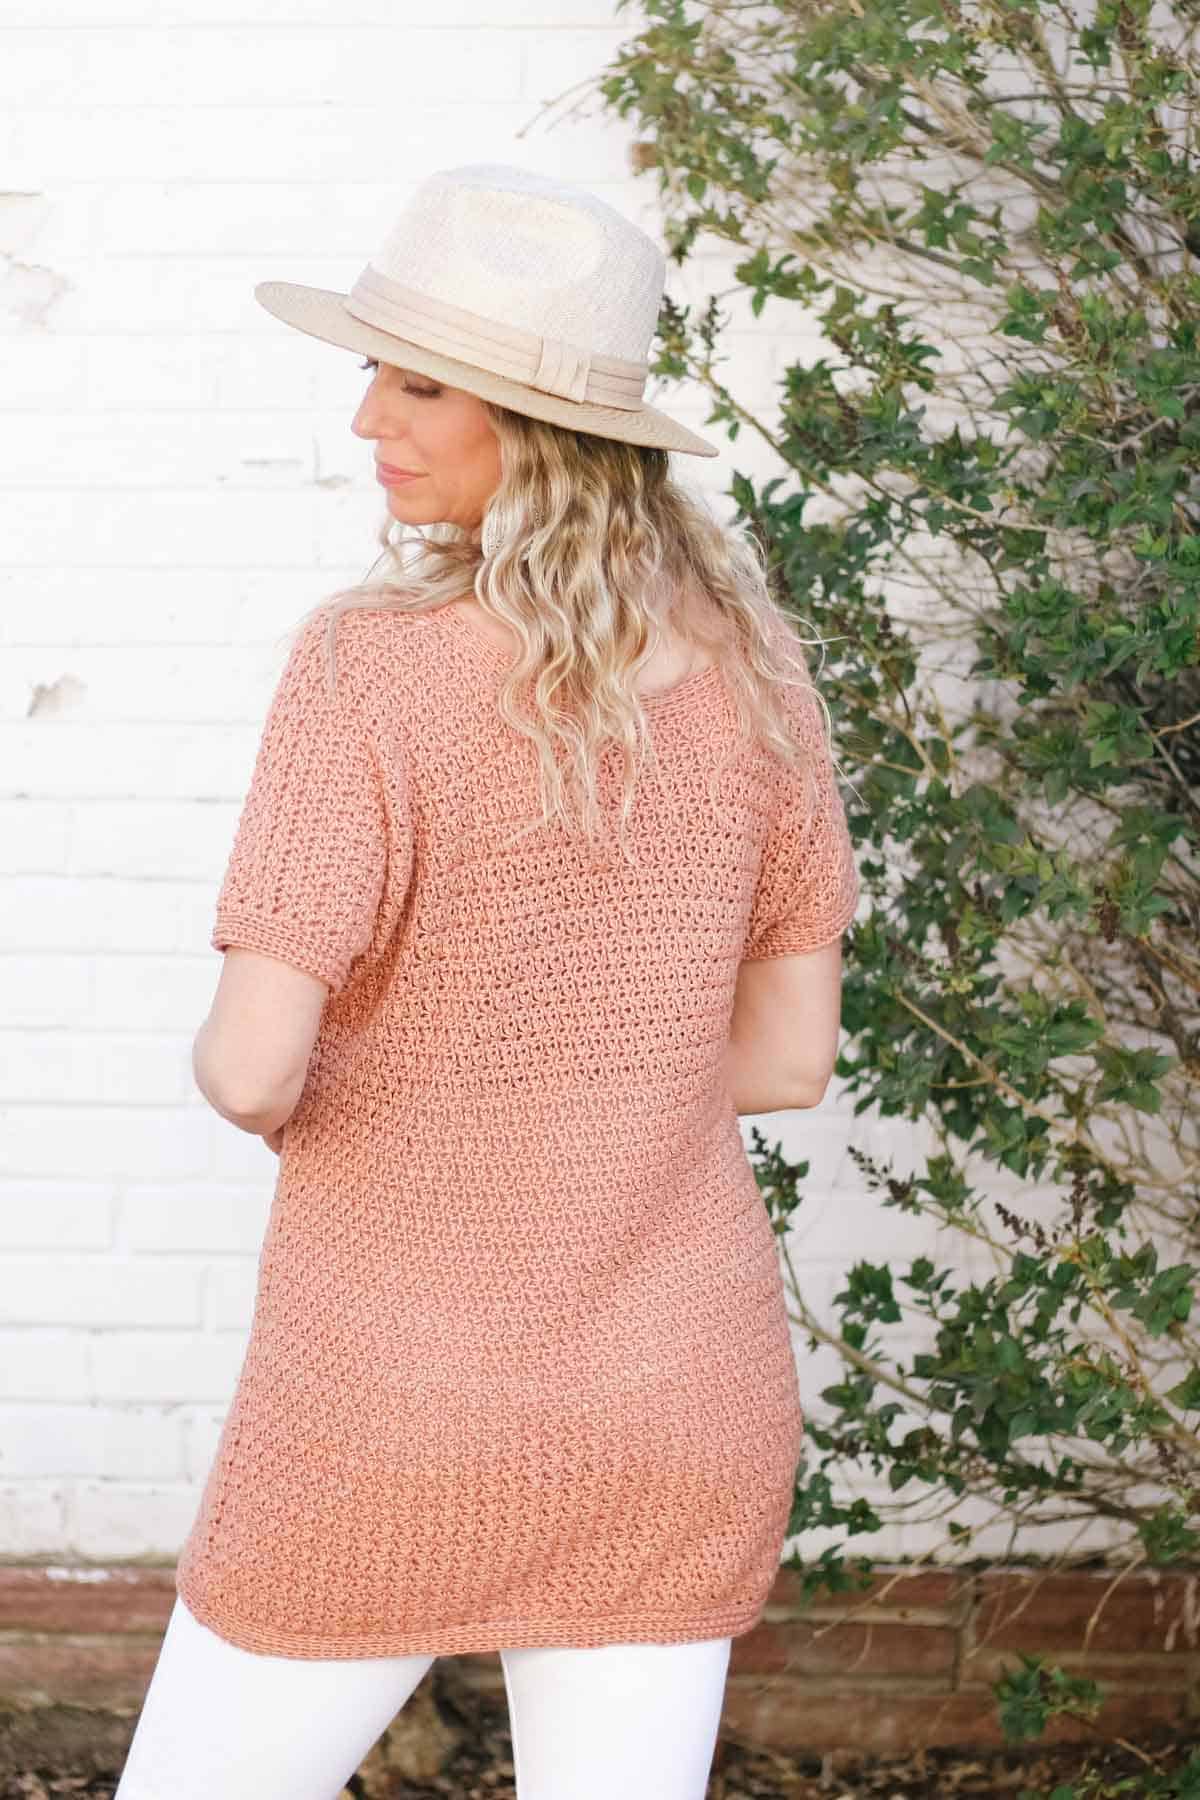 This image shows a woman facing away from the camera standing in front of a white wall with greenery around her. She has blonde hair and is wearing white pants, a light pink colored crochet tunic tee. and a tan hat.